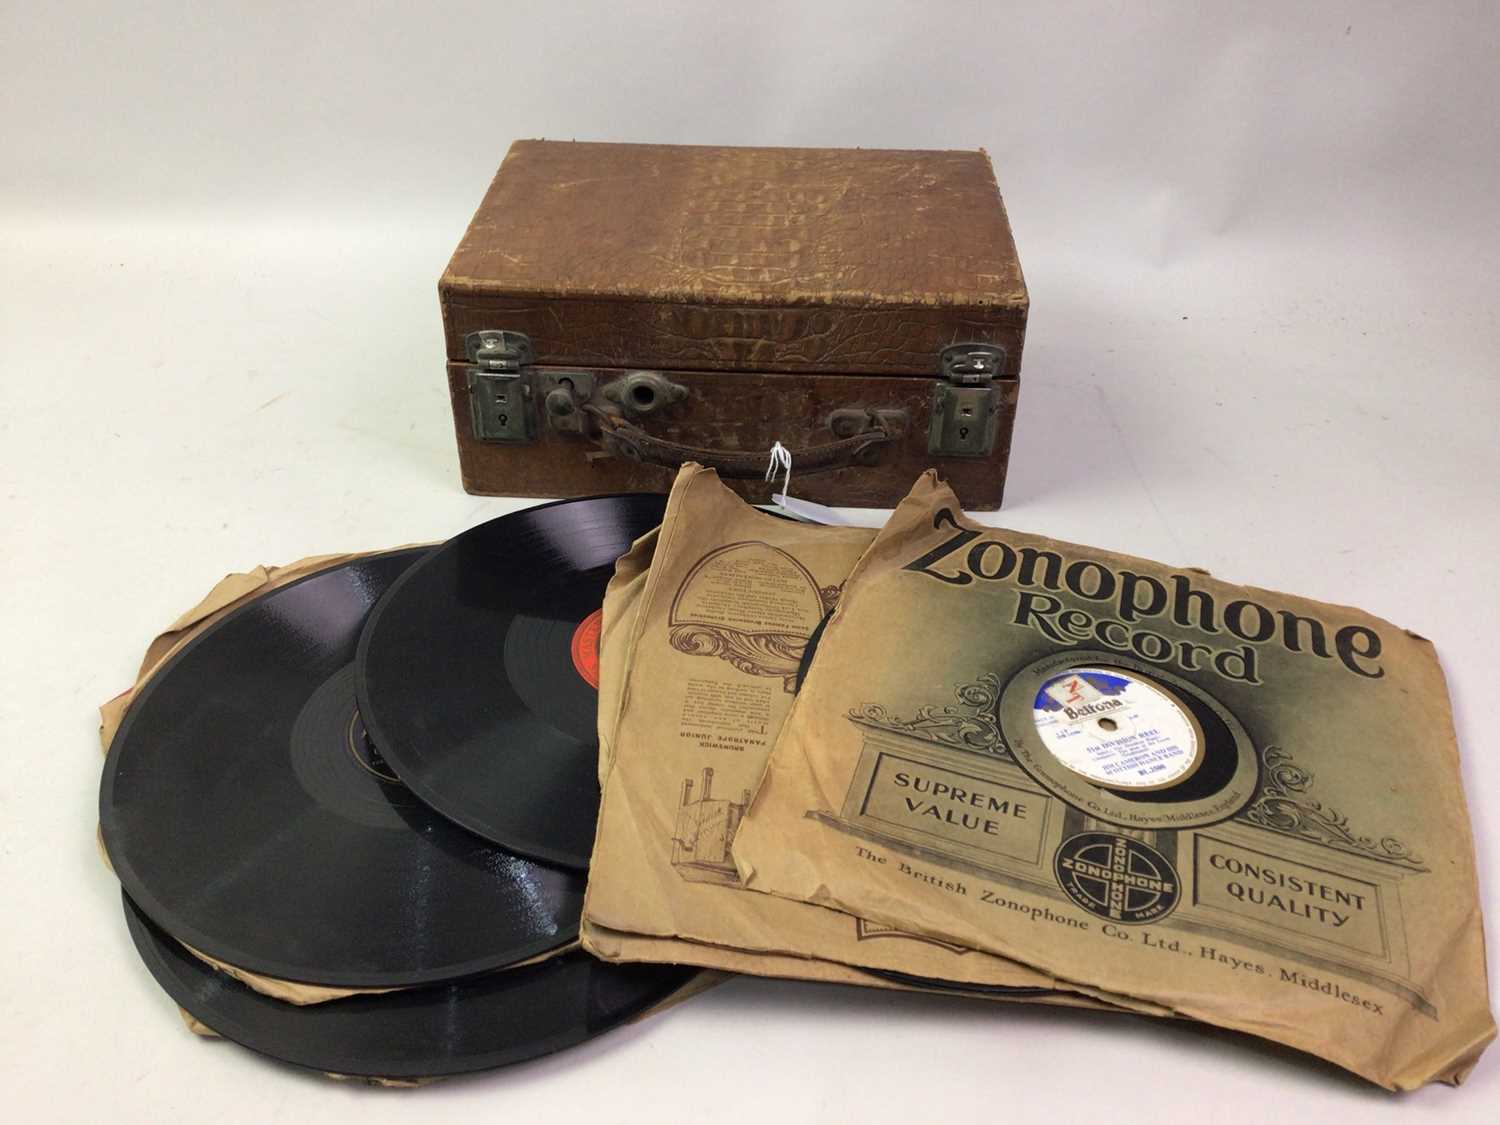 PIXIE GRIPPA PORTABLE GRAMOPHONE, AND RECORDS - Image 3 of 3